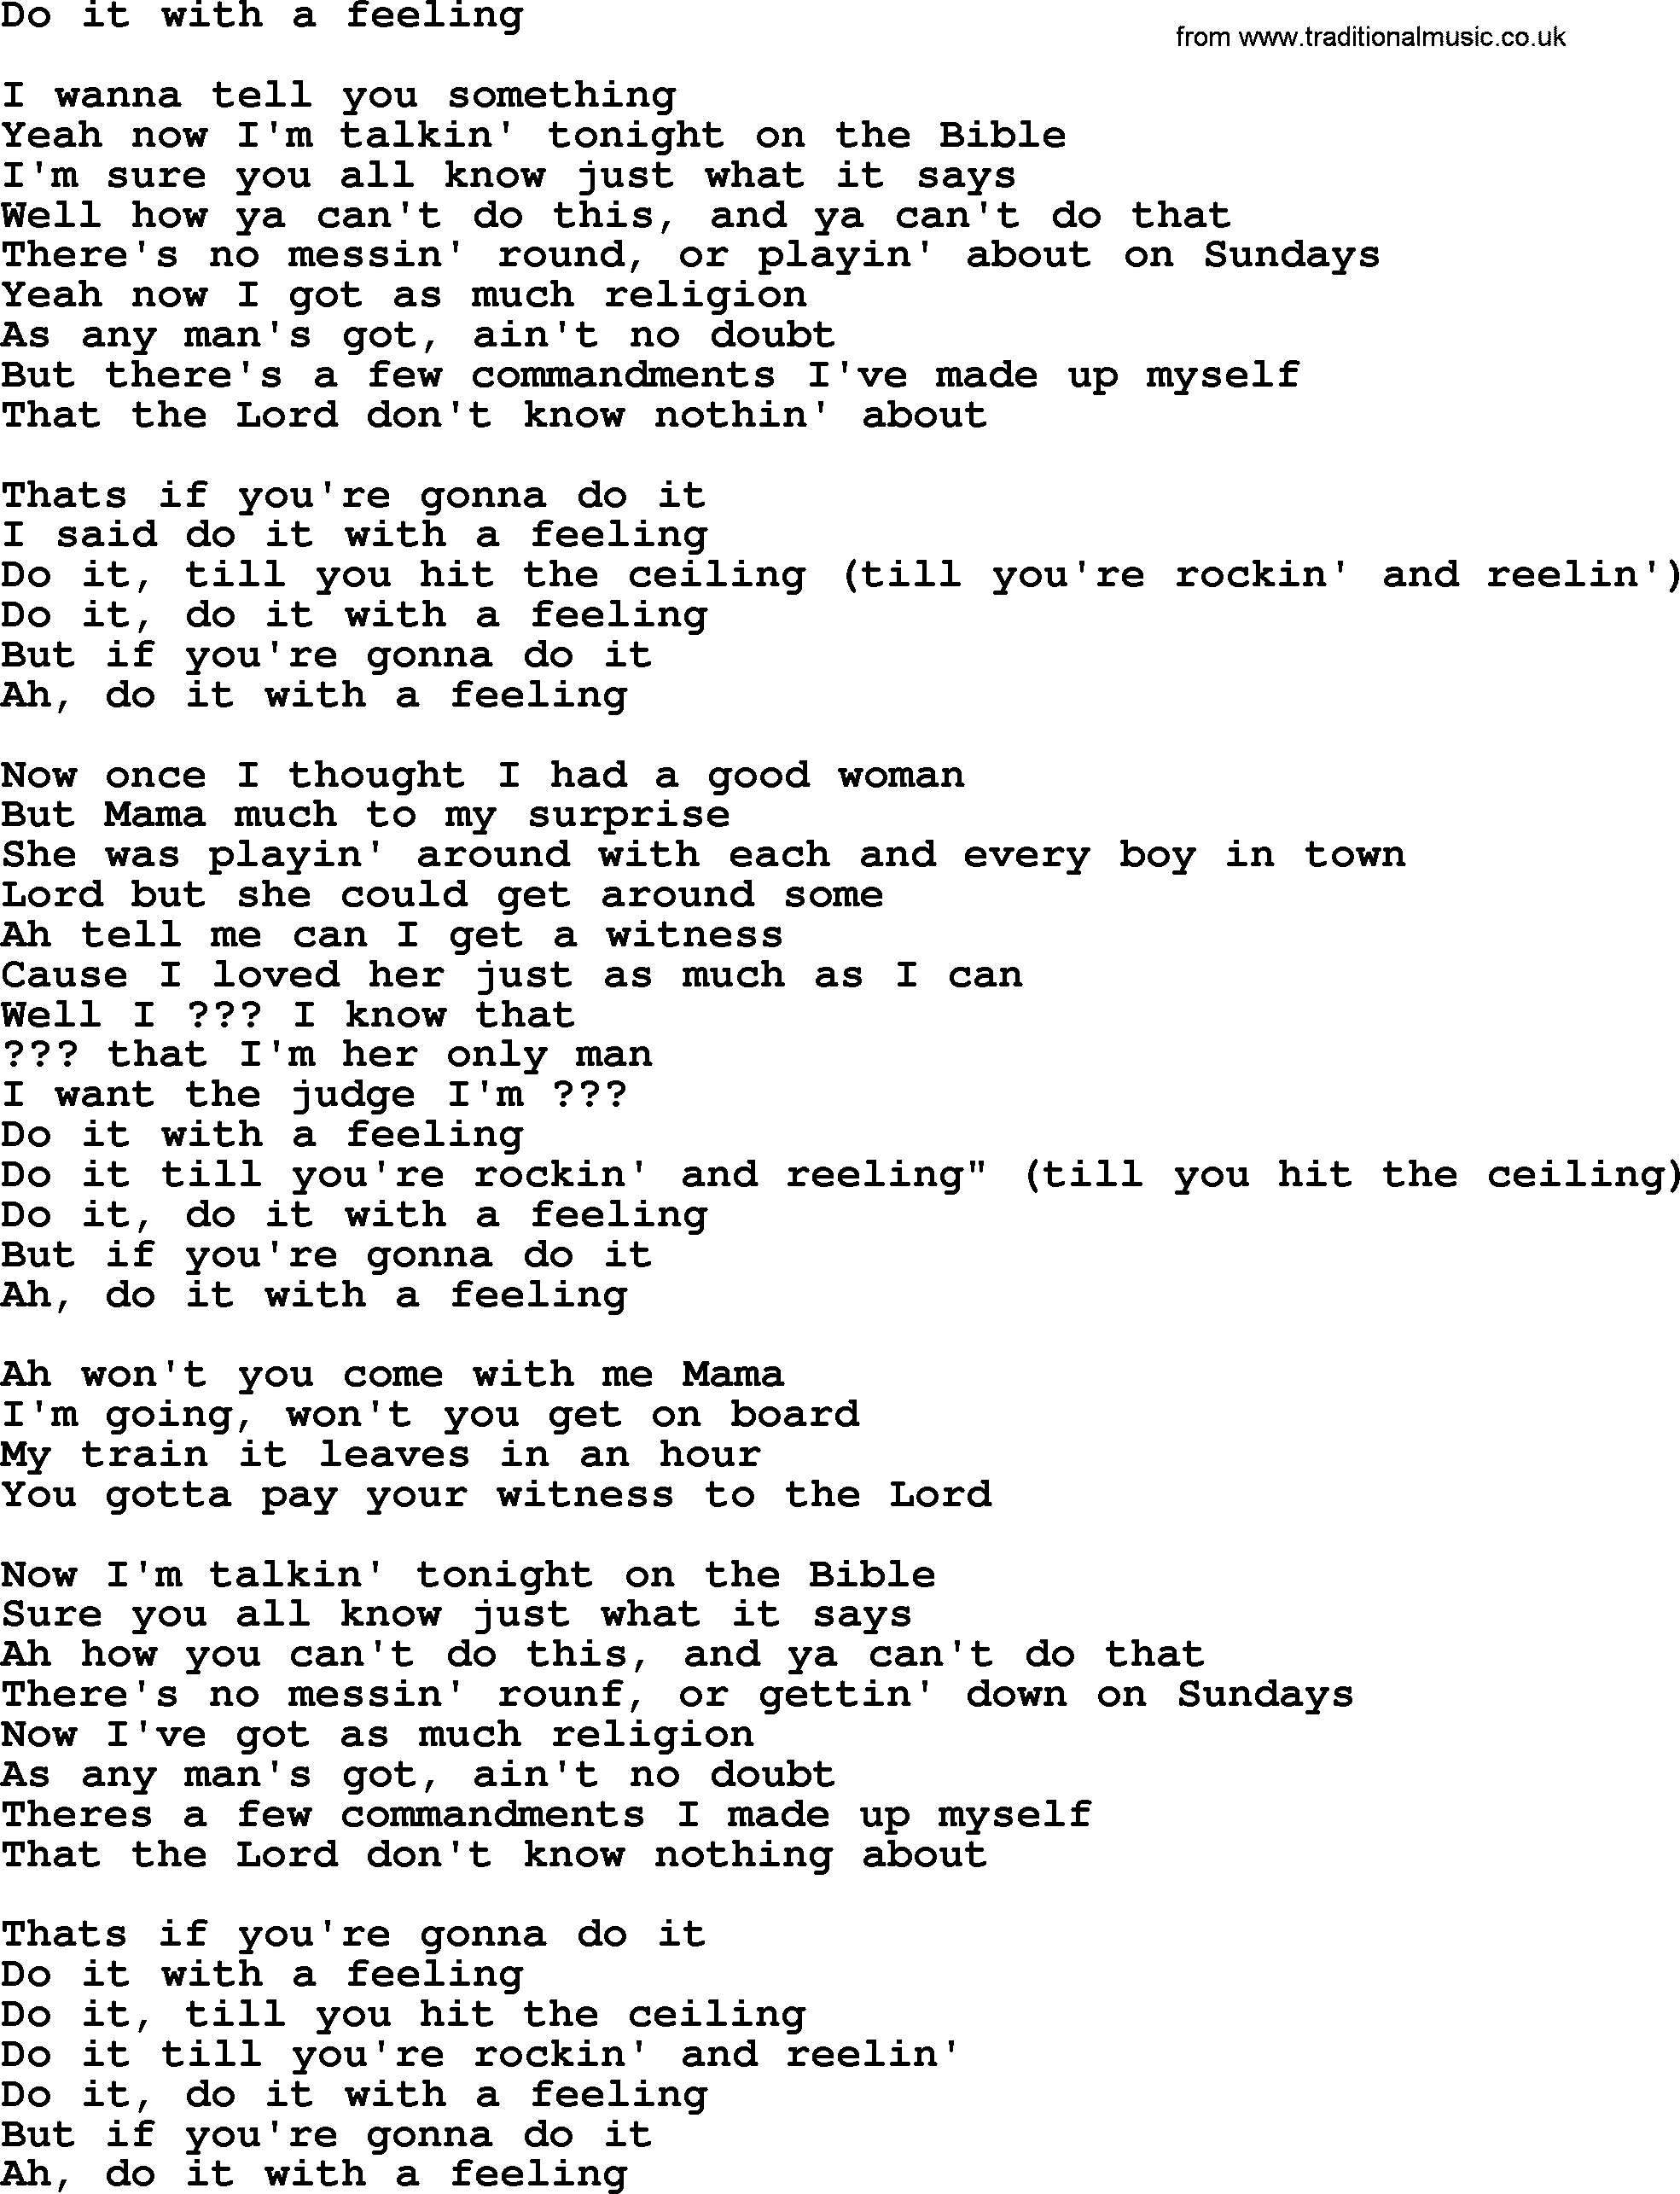 Bruce Springsteen song: Do It With A Feeling lyrics